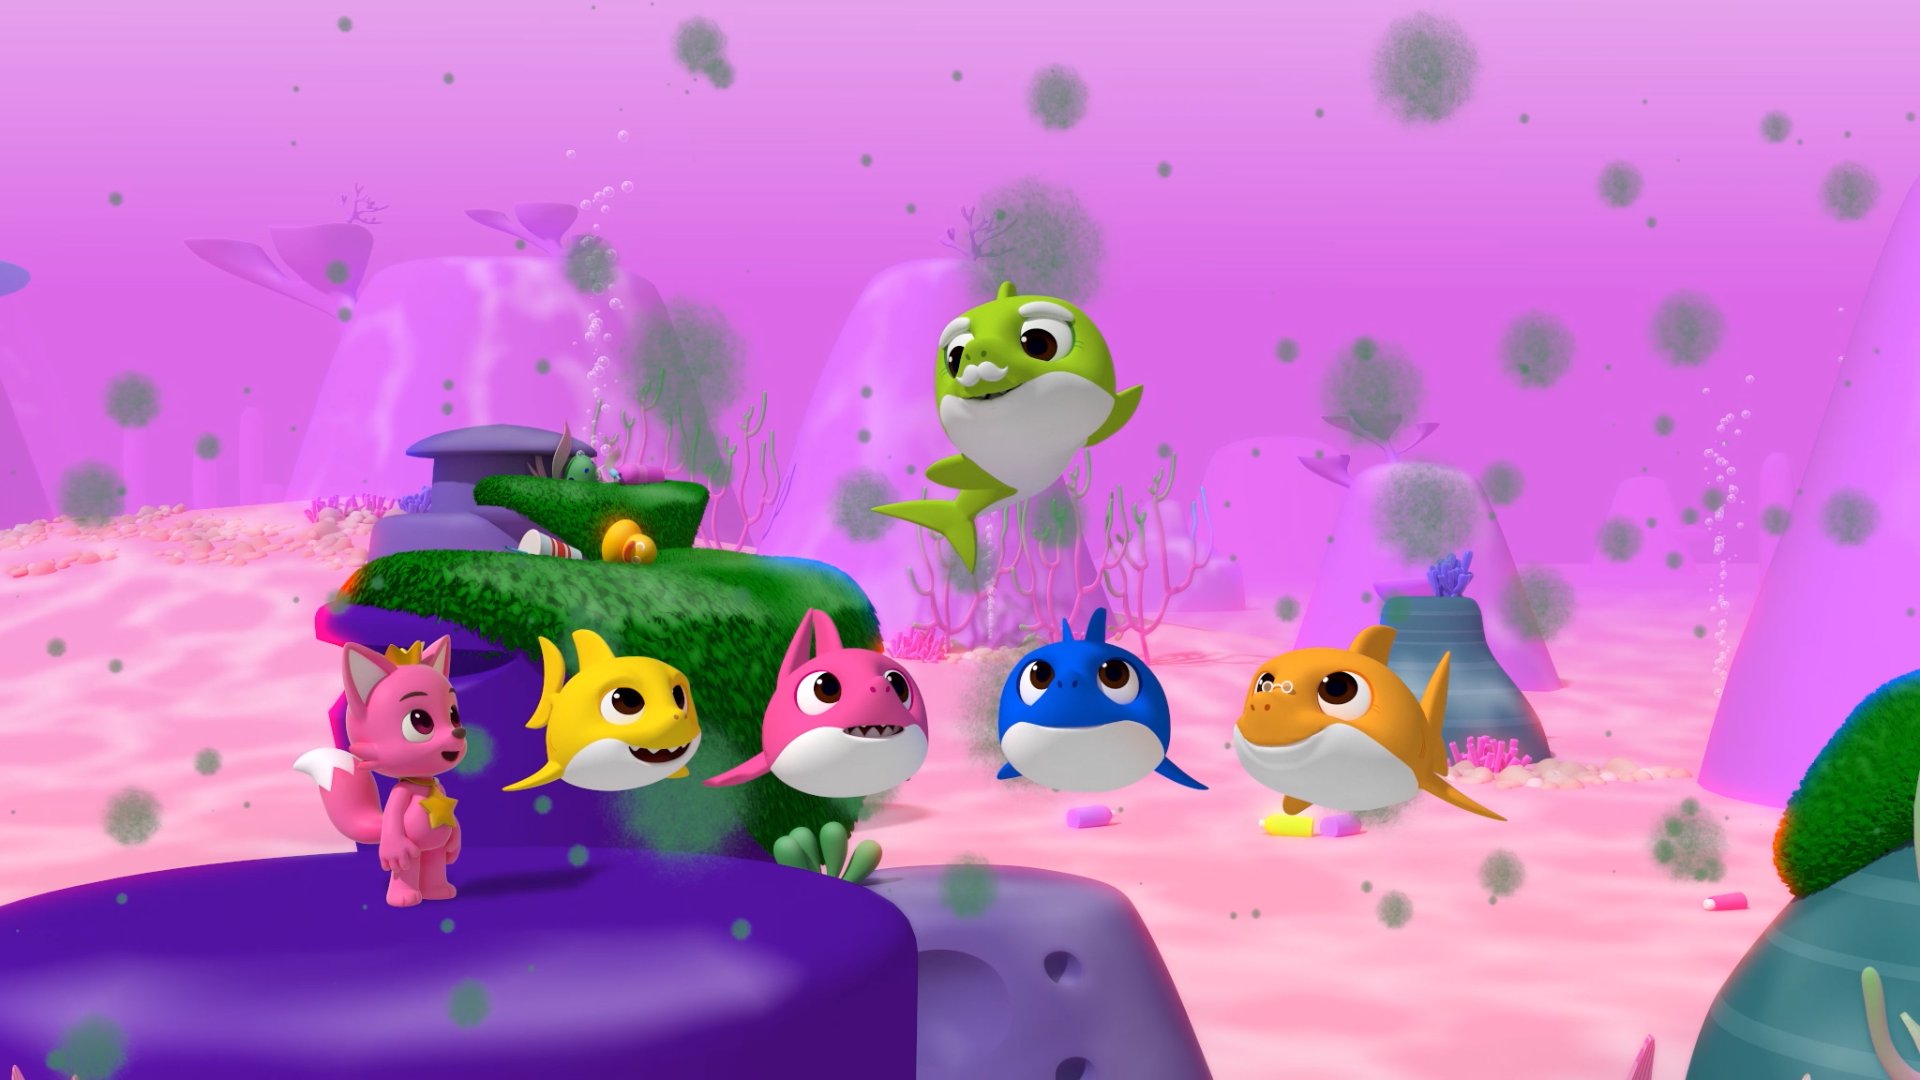 Pinkfong & Baby Sharks Space Adventure